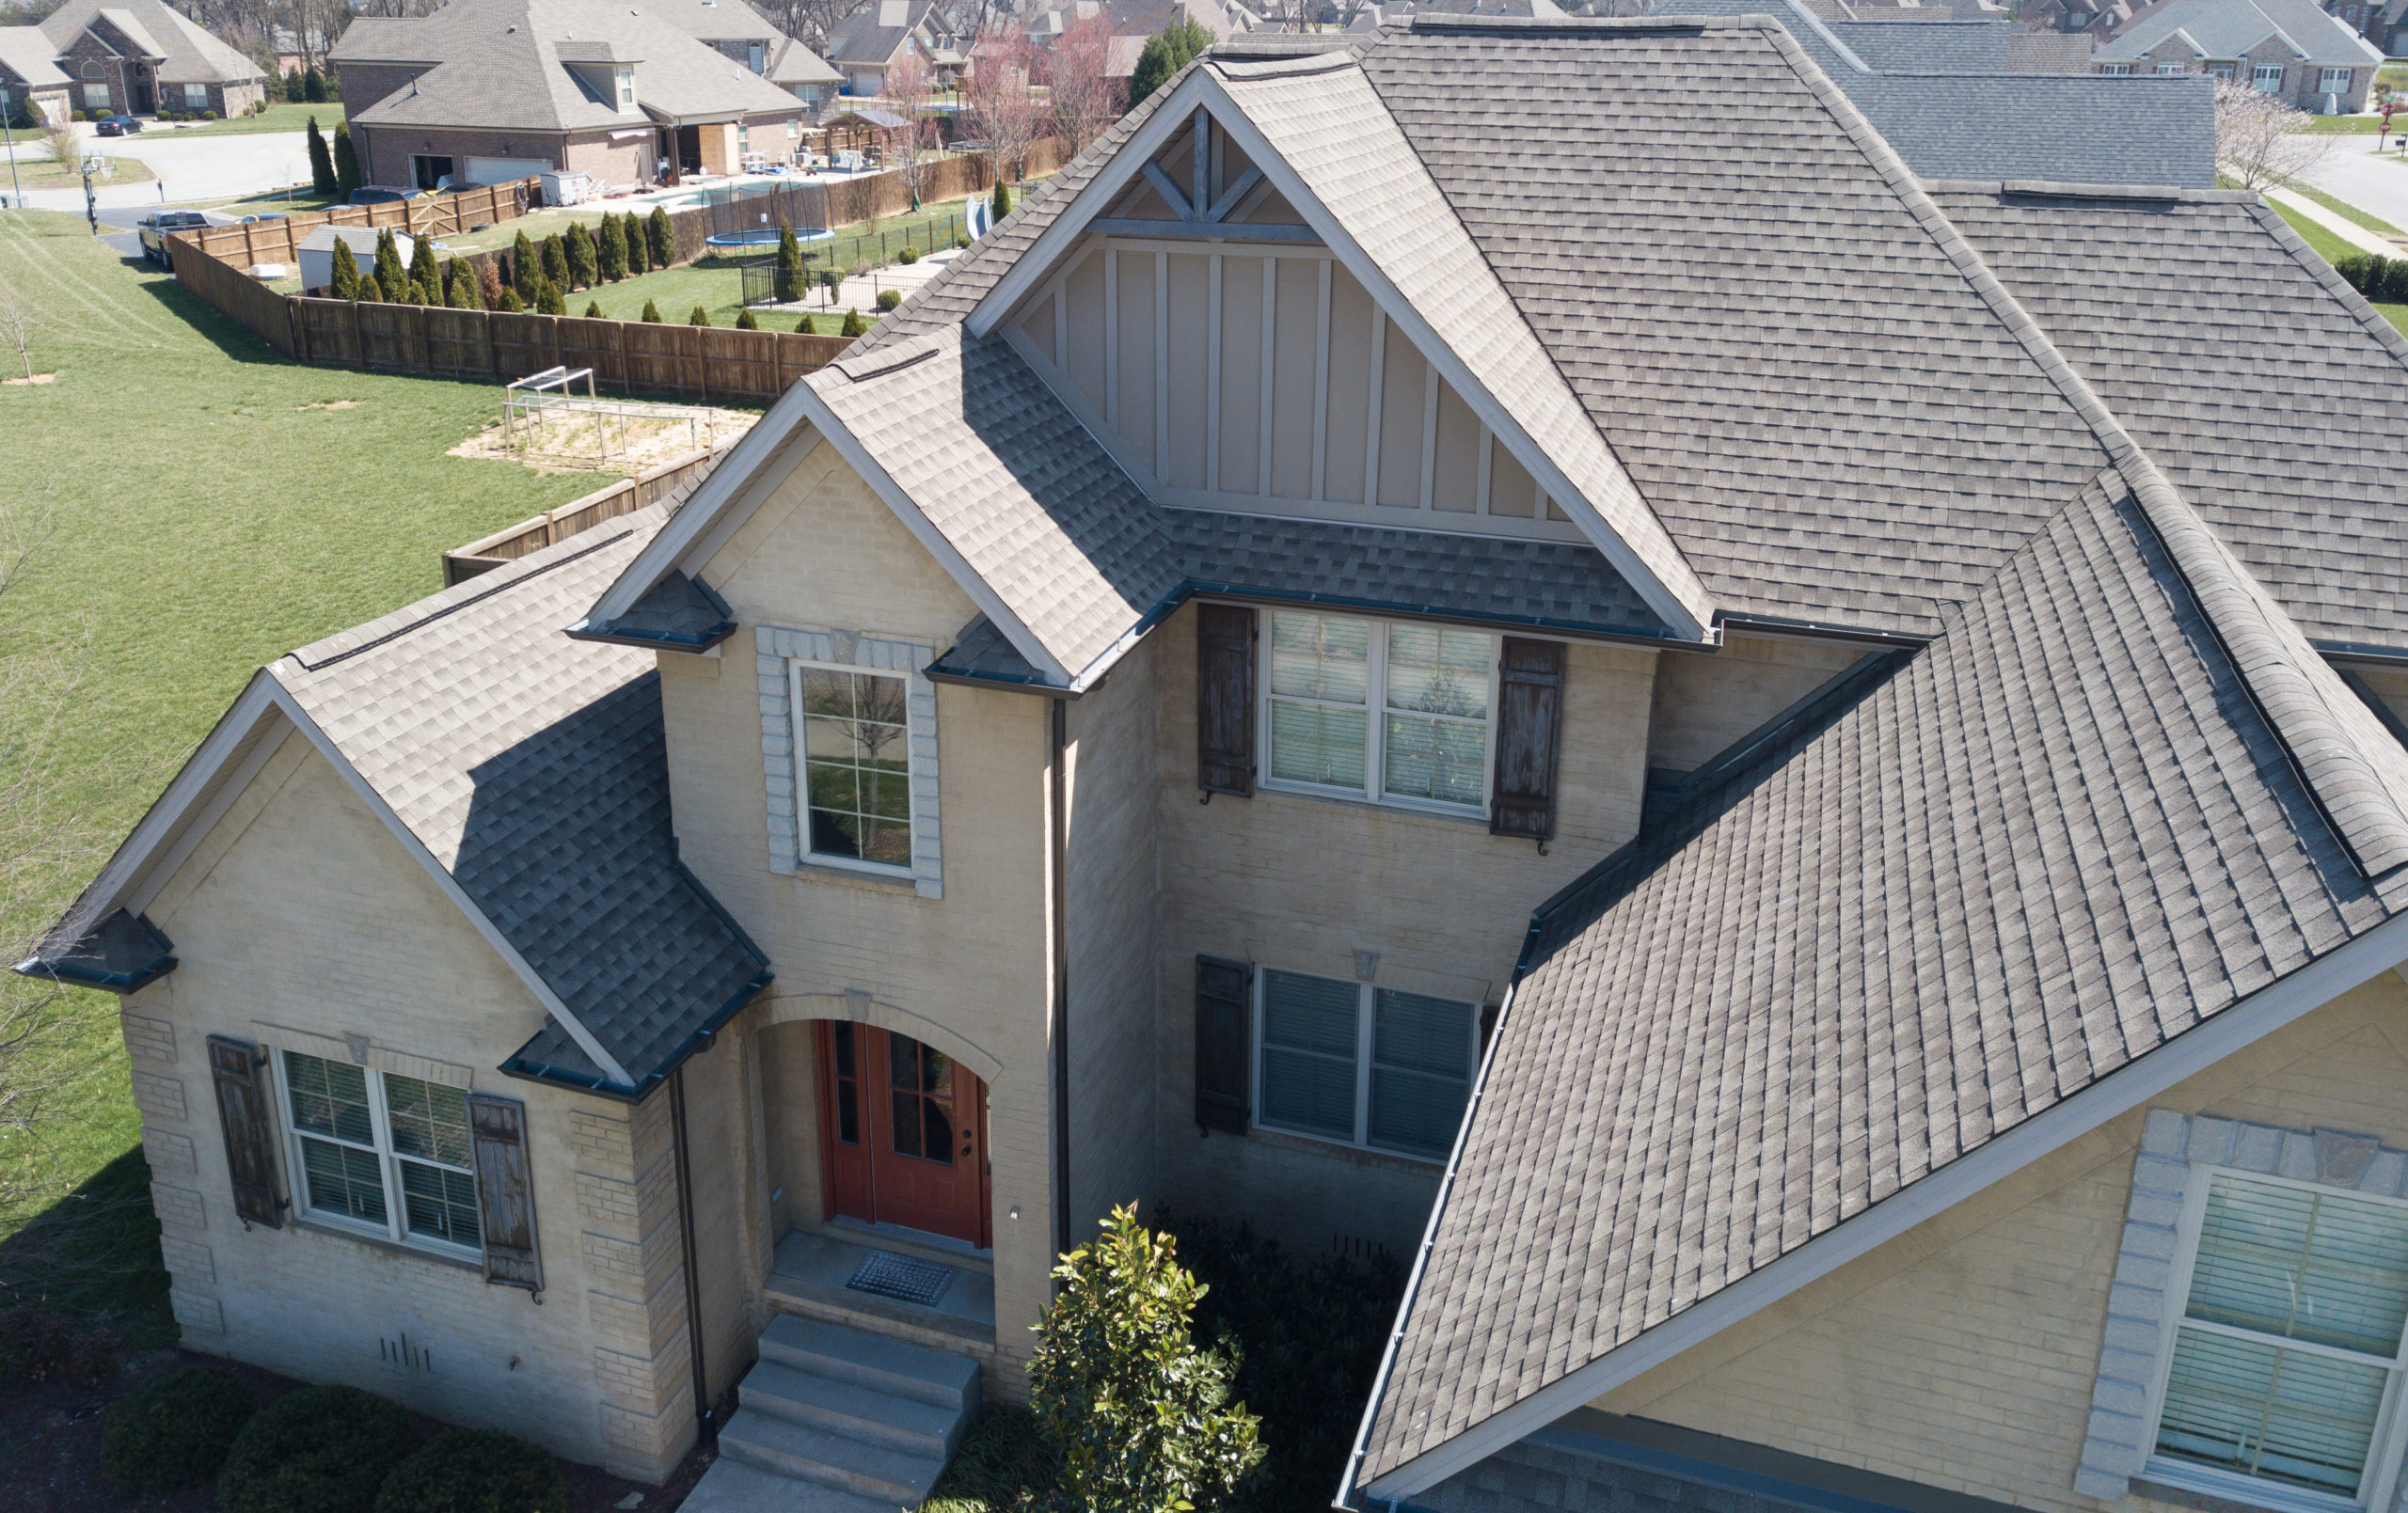 Roofing Contractors in King of Prussia, PA